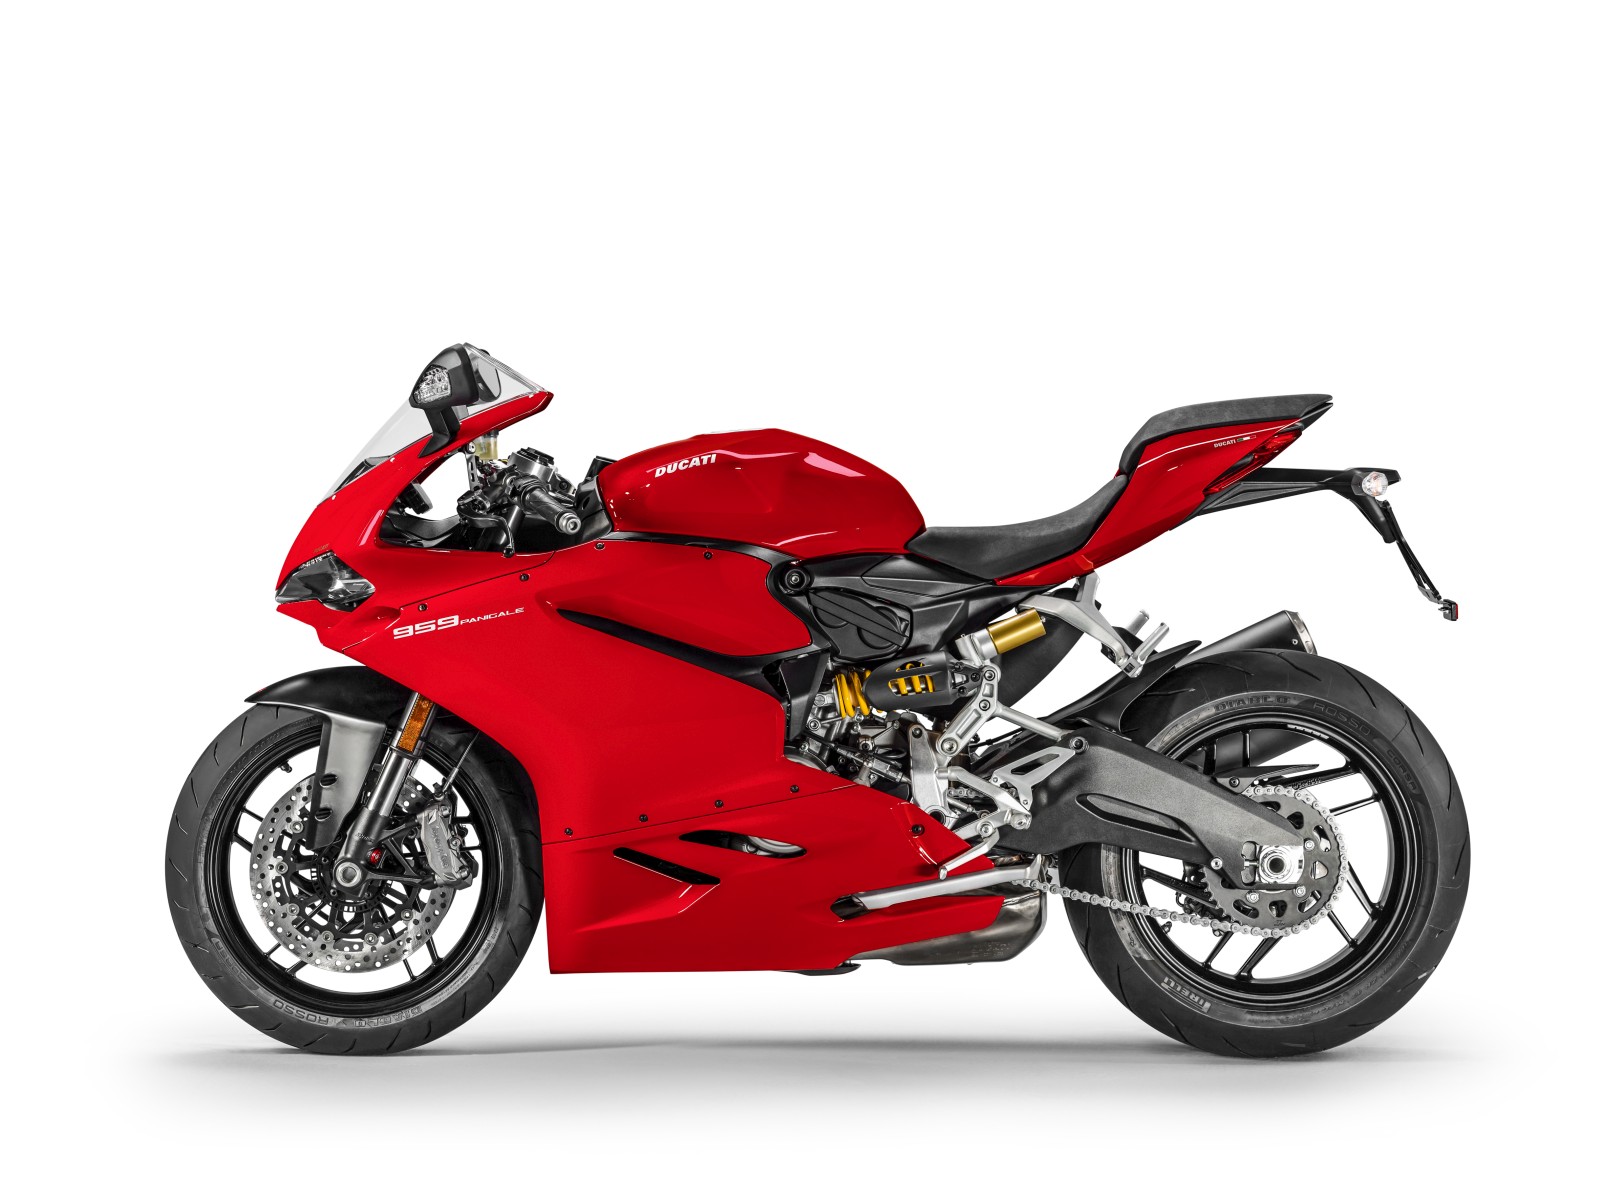 New Ducati 959 Panigale - India Launch (4)